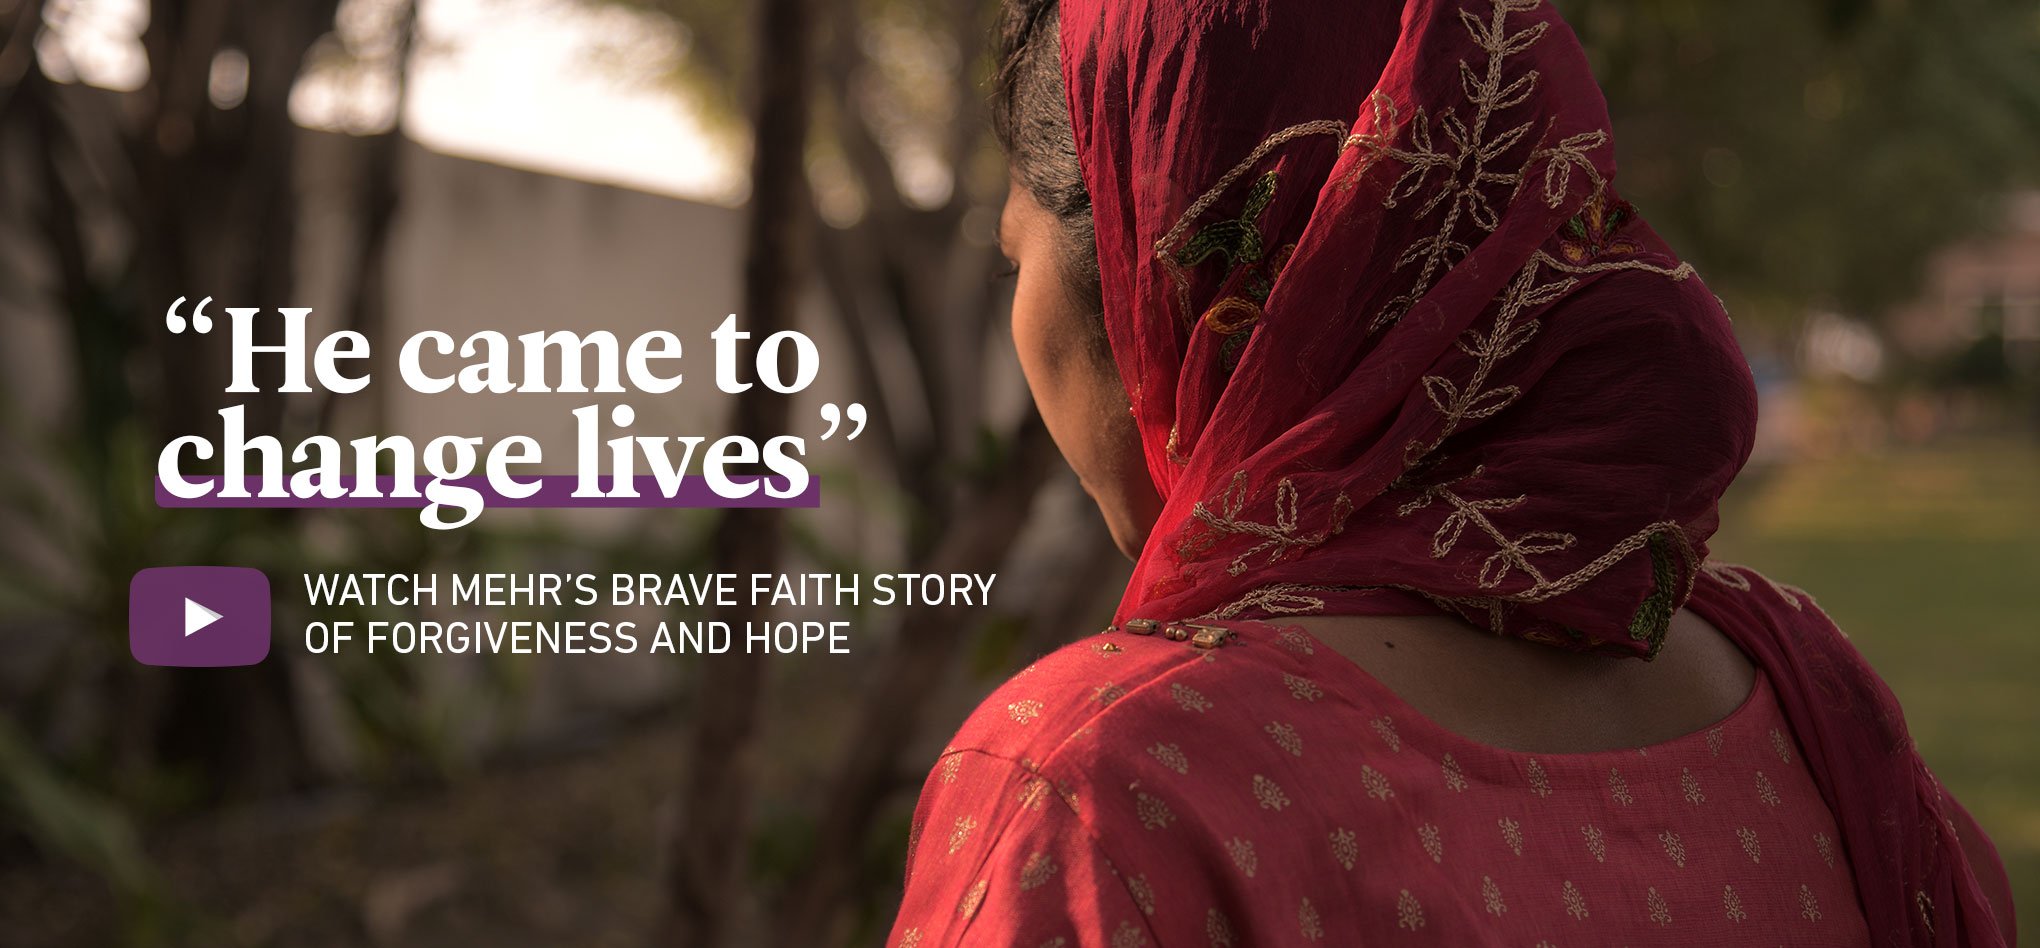 India: Watch Mehr’s story